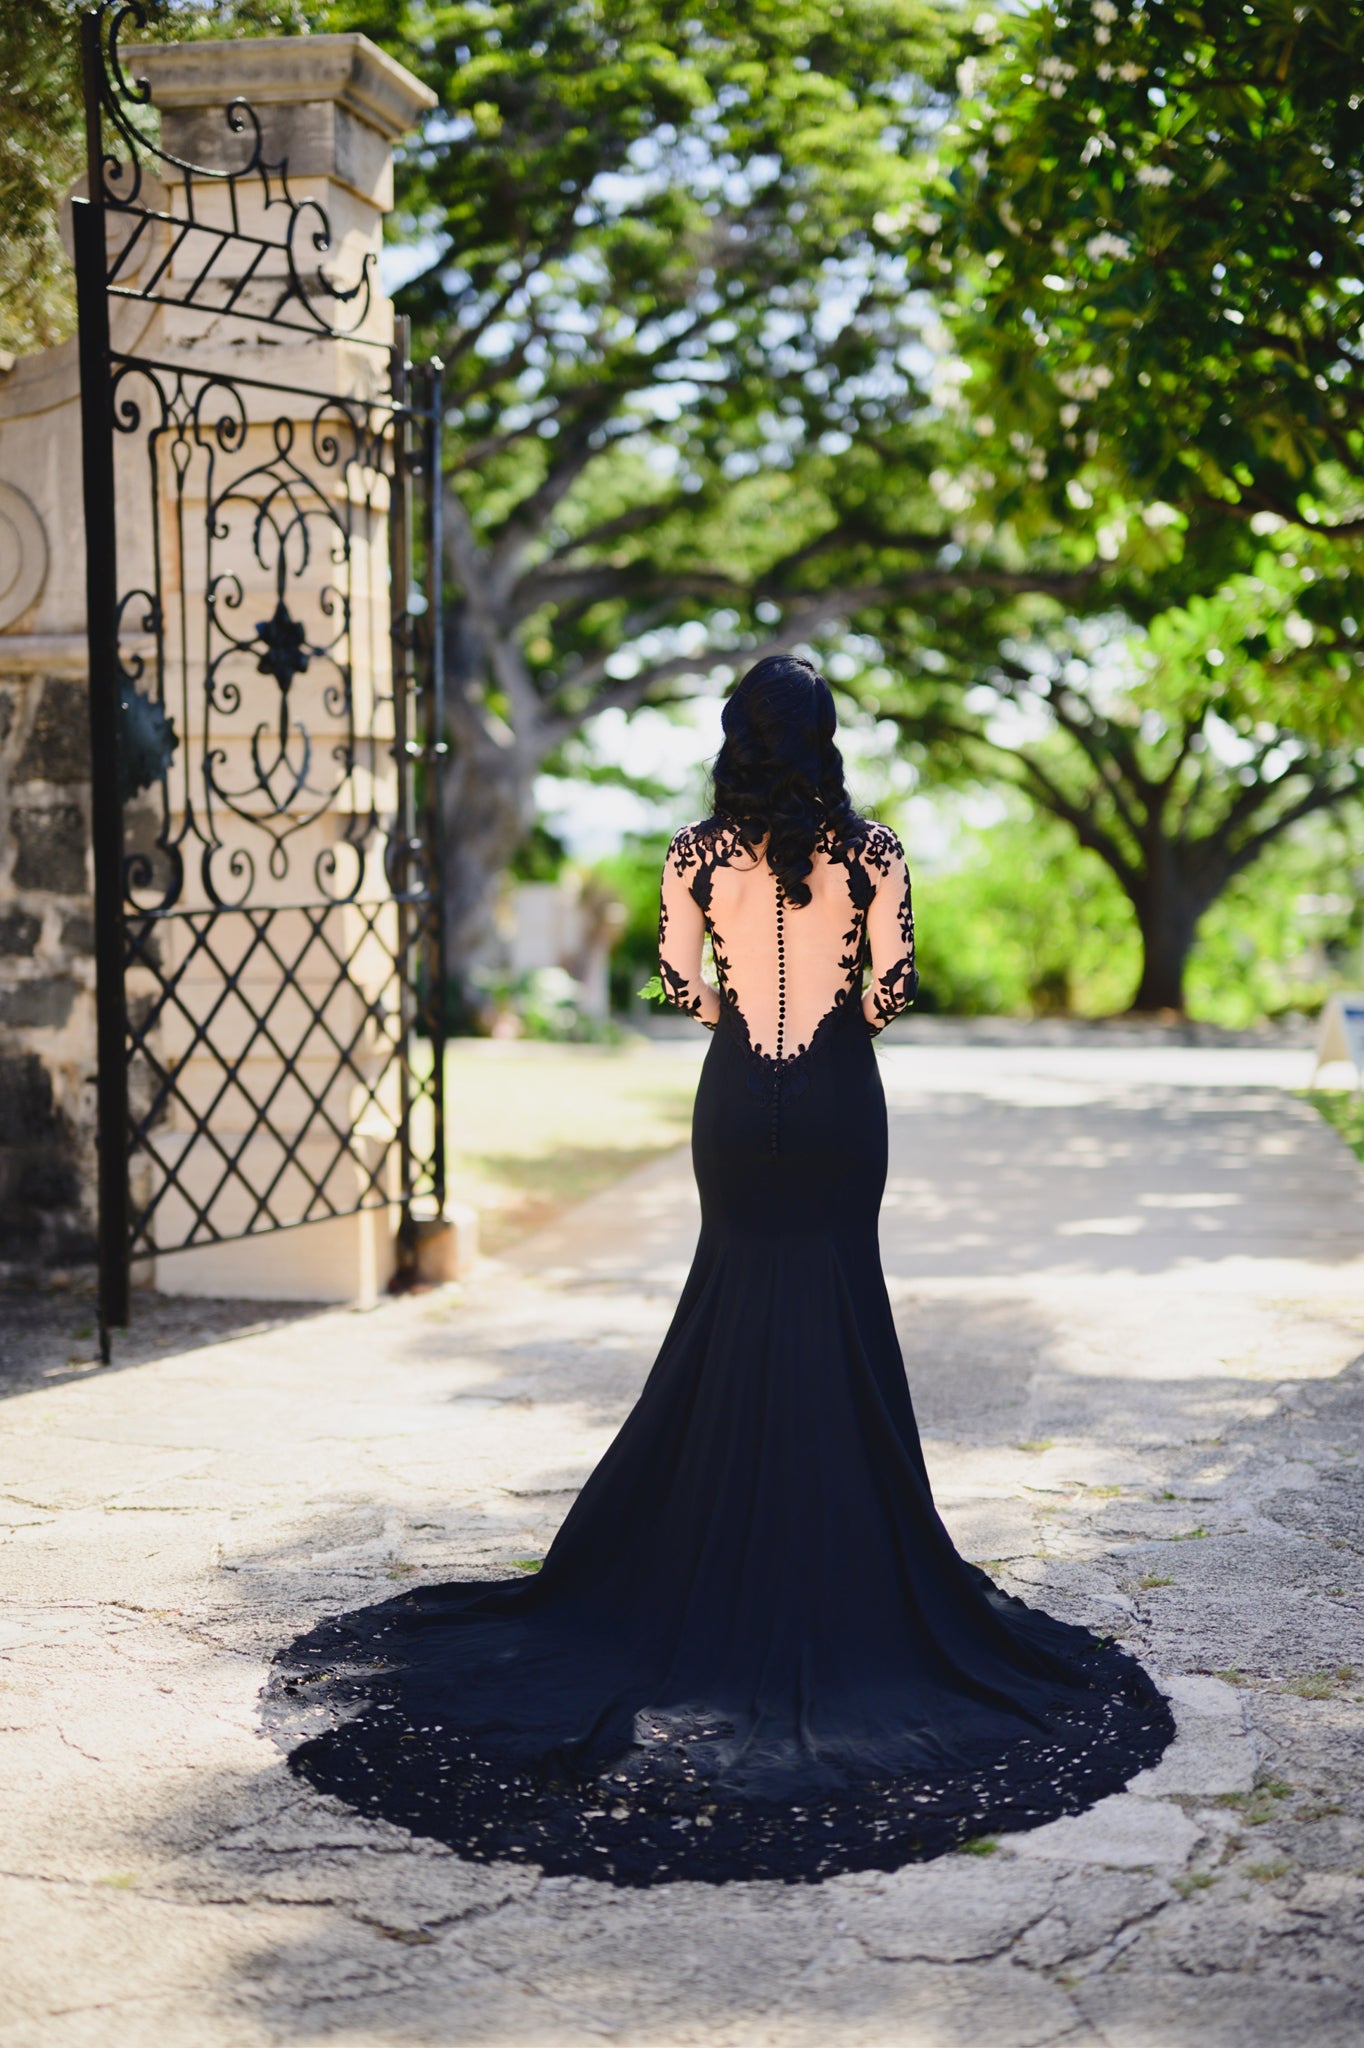 Gothic Black Satin Wedding Dresses Long Sleeve Lace Appliques Bridal Ball  Gown | eBay